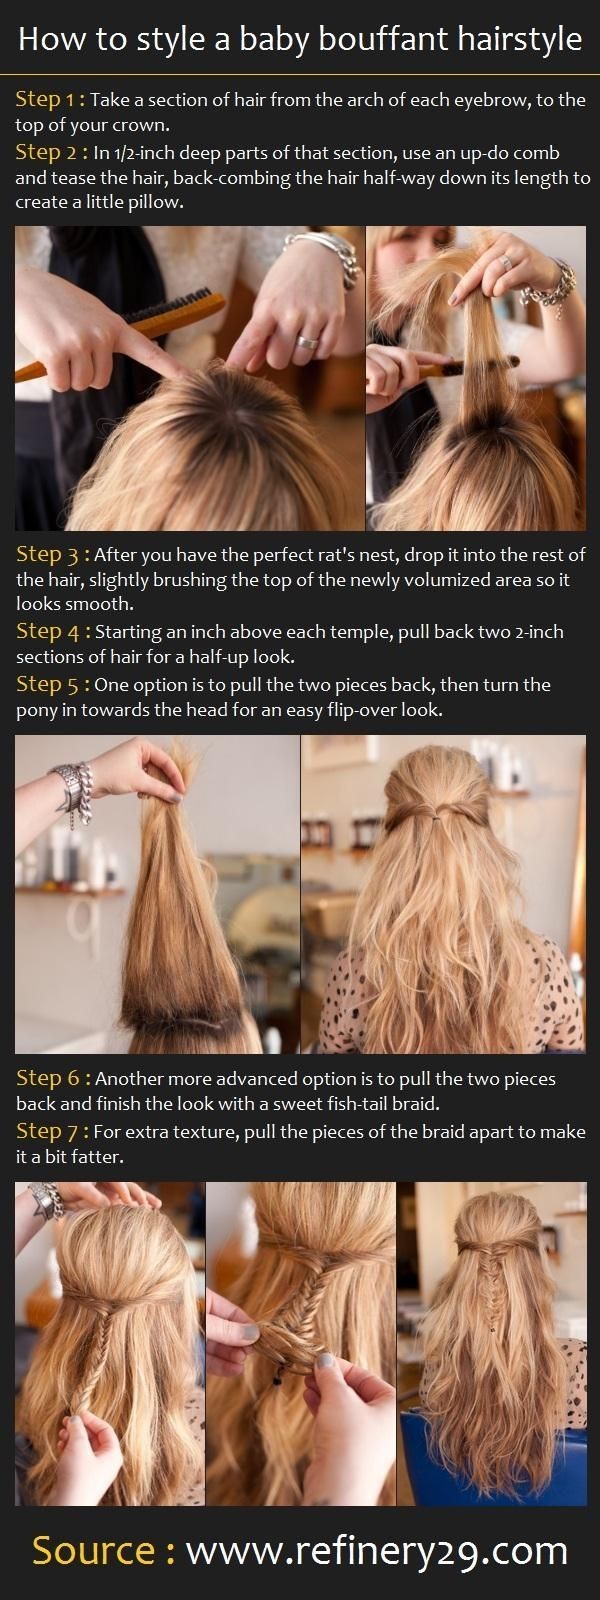 Cute Diy Hairstyles for School: Bouffant Hairstyle